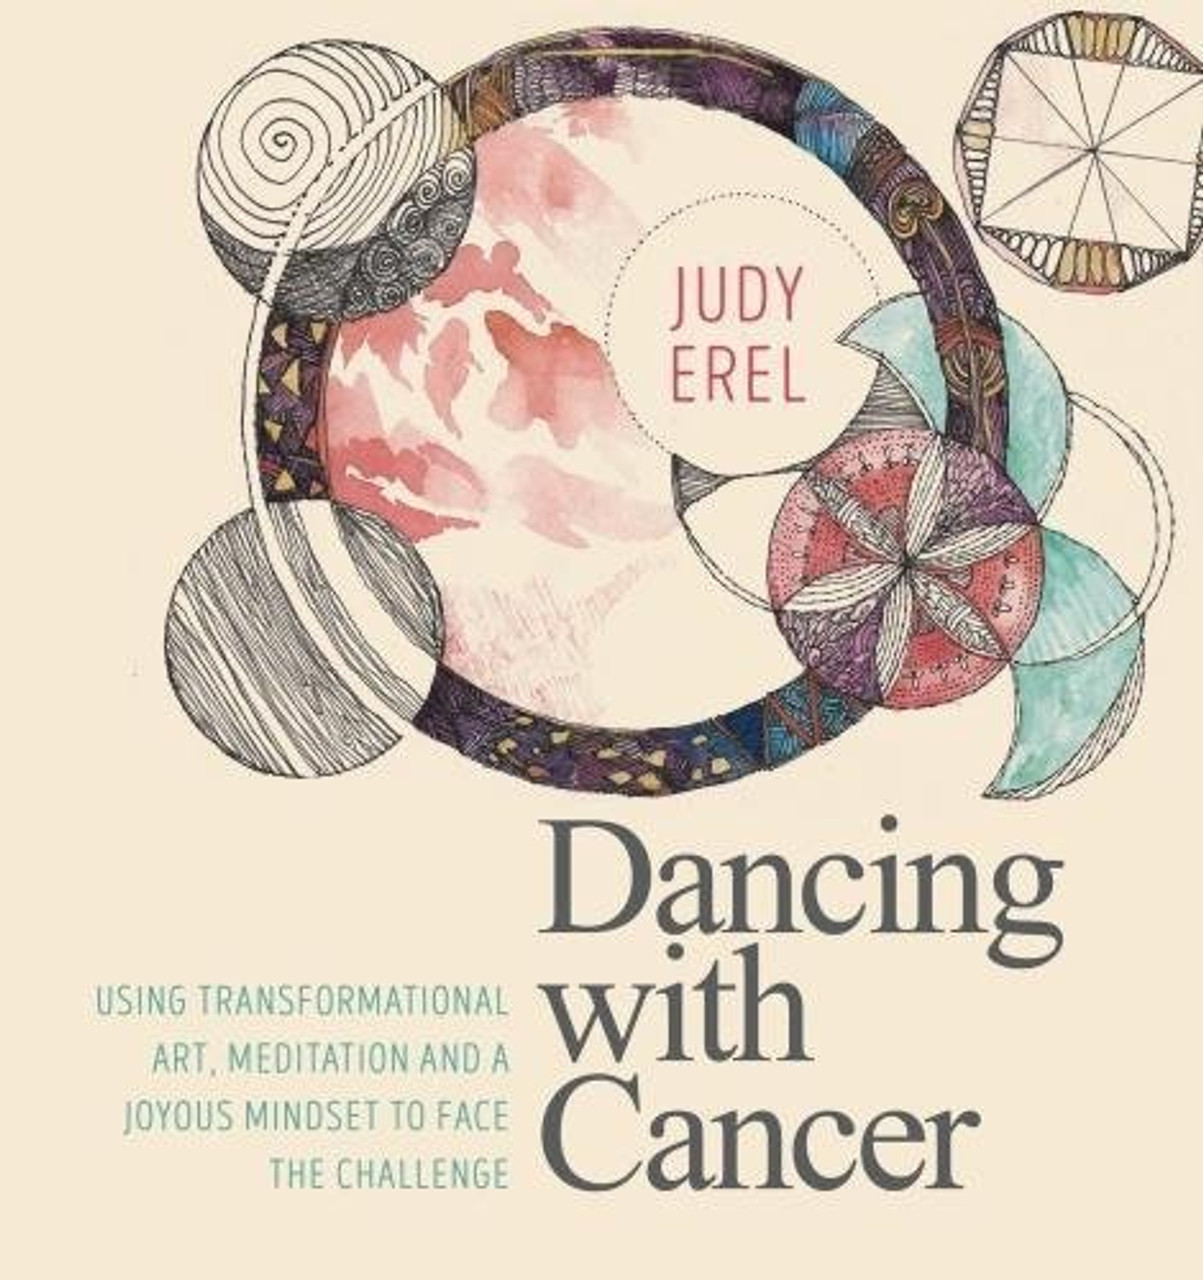 Judy Erel / Dancing with Cancer: Using Transformational Art, Meditation and a Joyous Mindset to Face the Challenge (Coffee Table book)